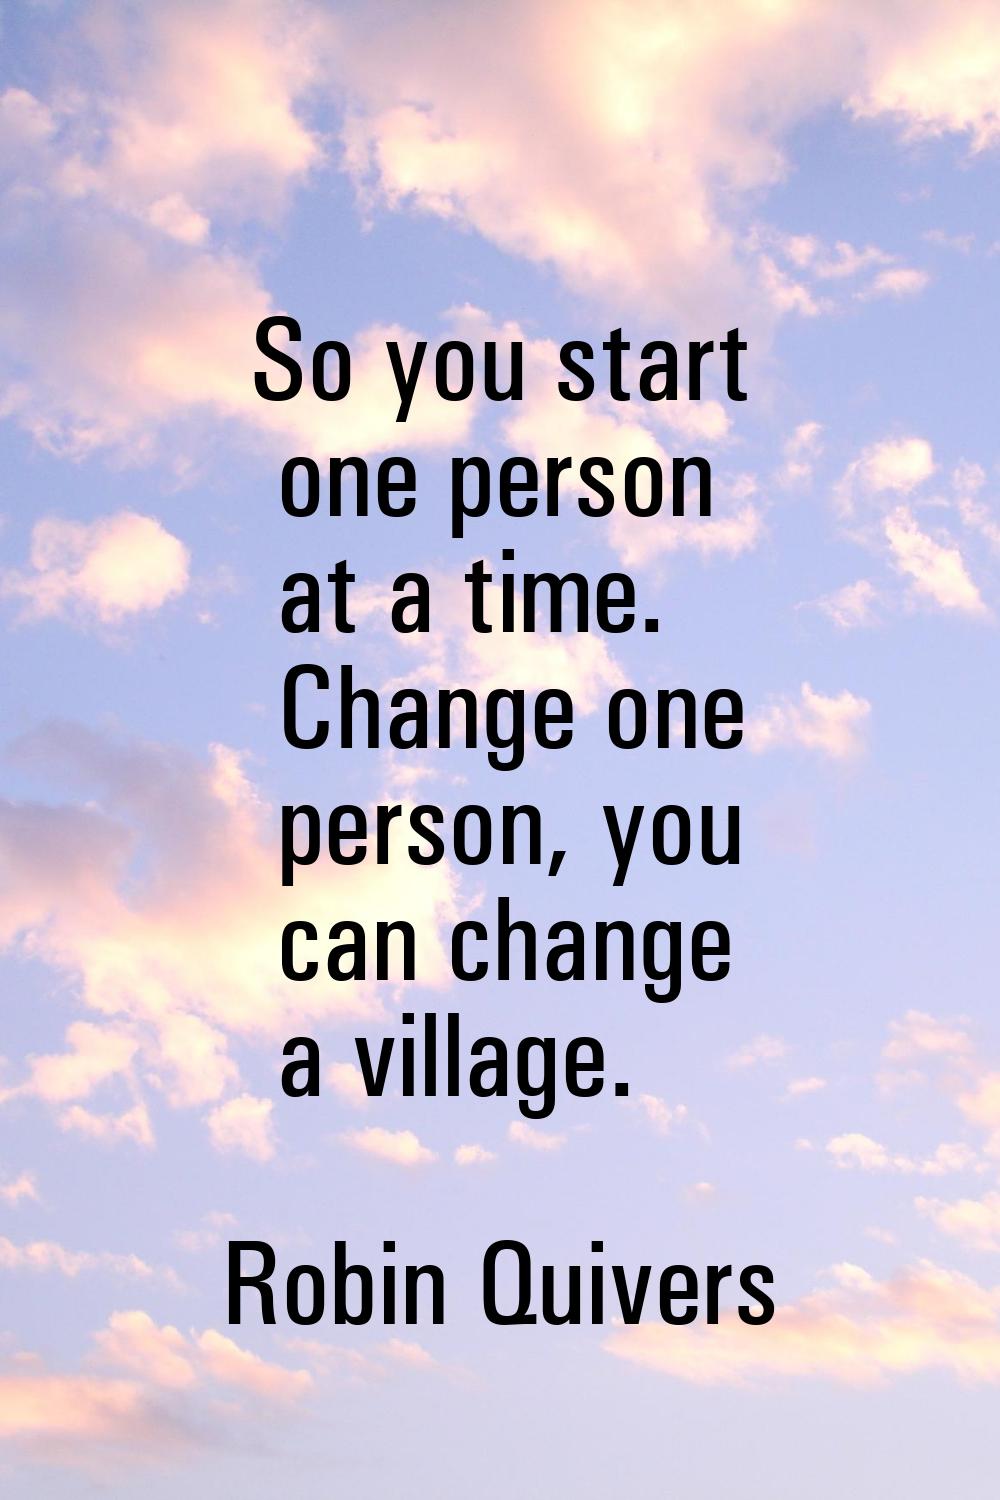 So you start one person at a time. Change one person, you can change a village.